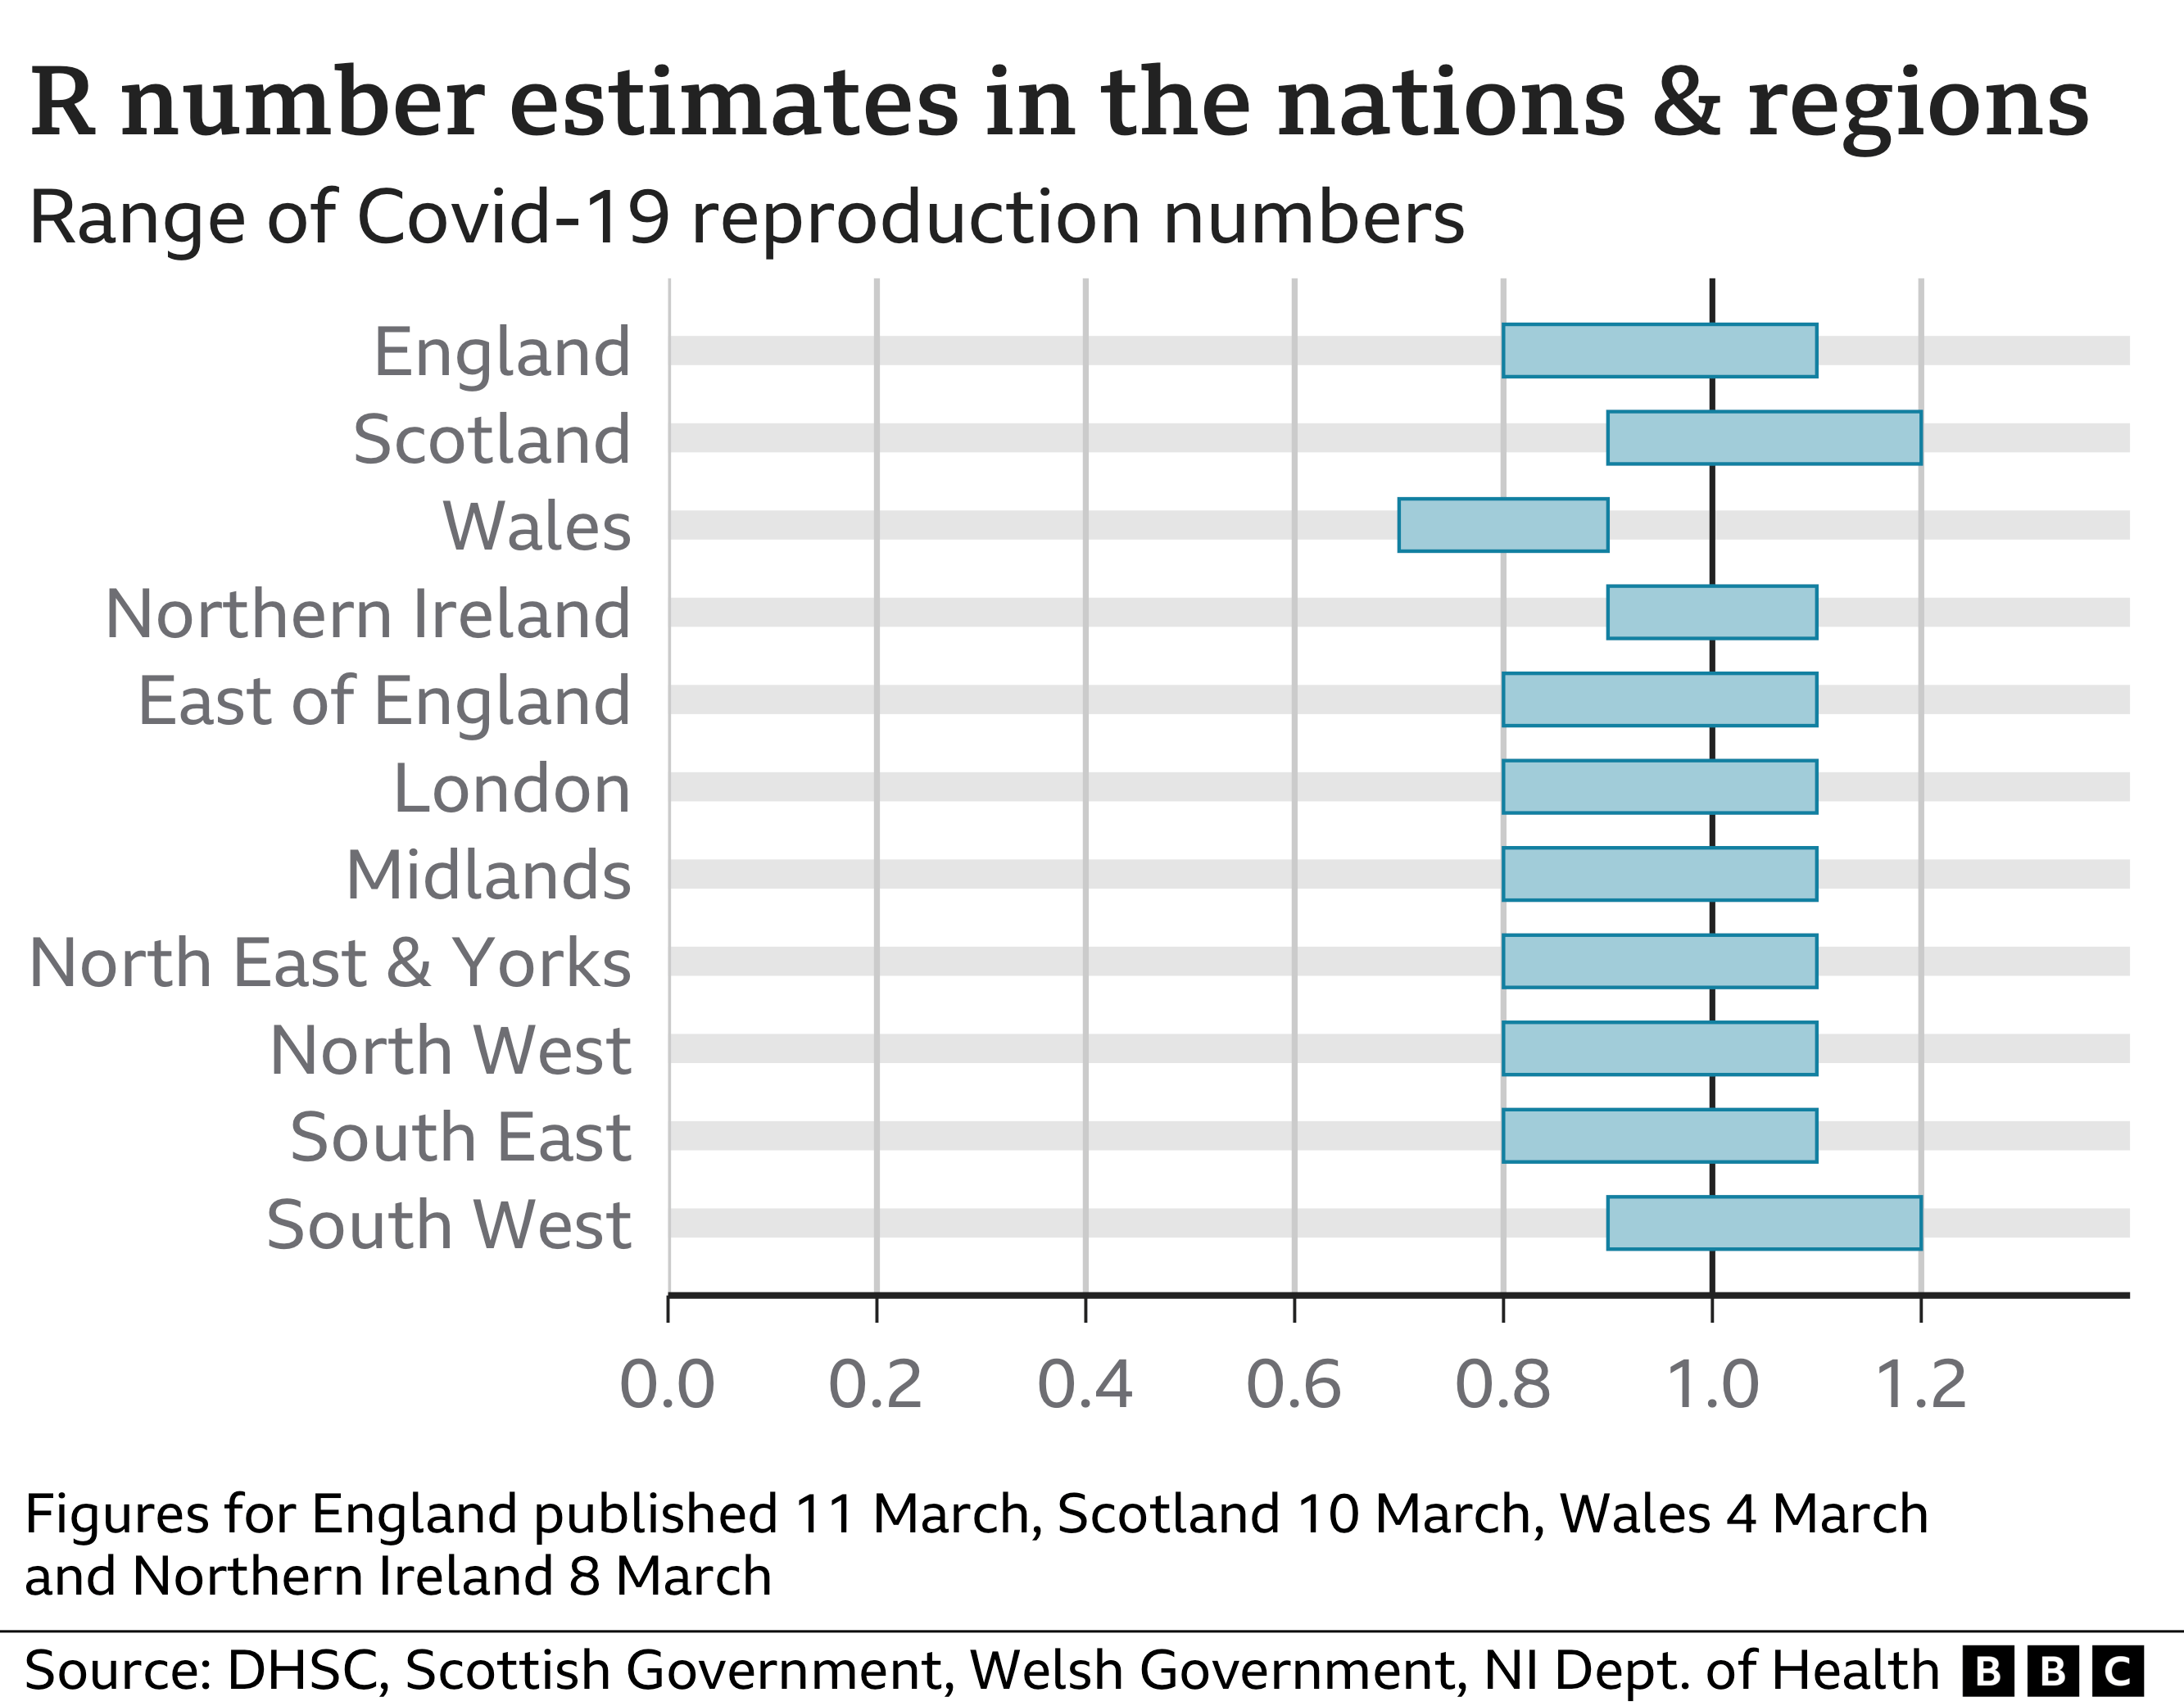 Chart showing R number estimates for the UK nations and English regions